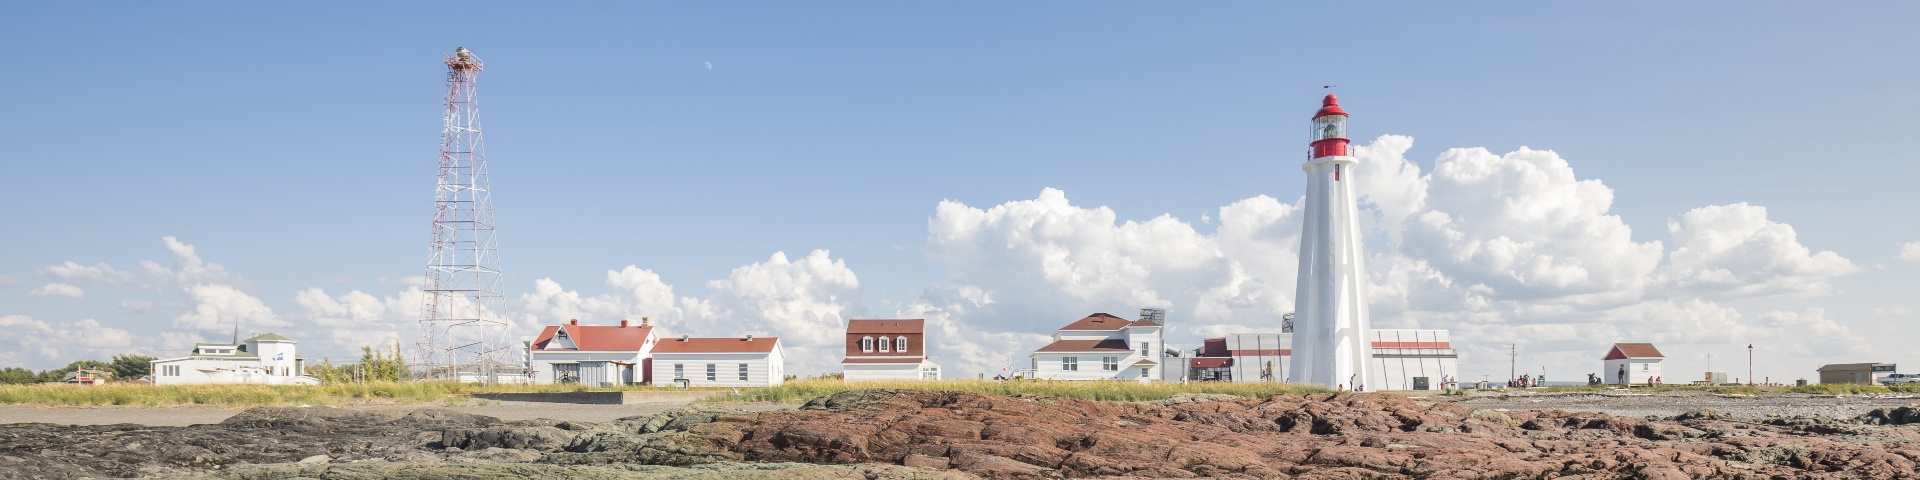 View of the lighthouse and its buildings along the shore